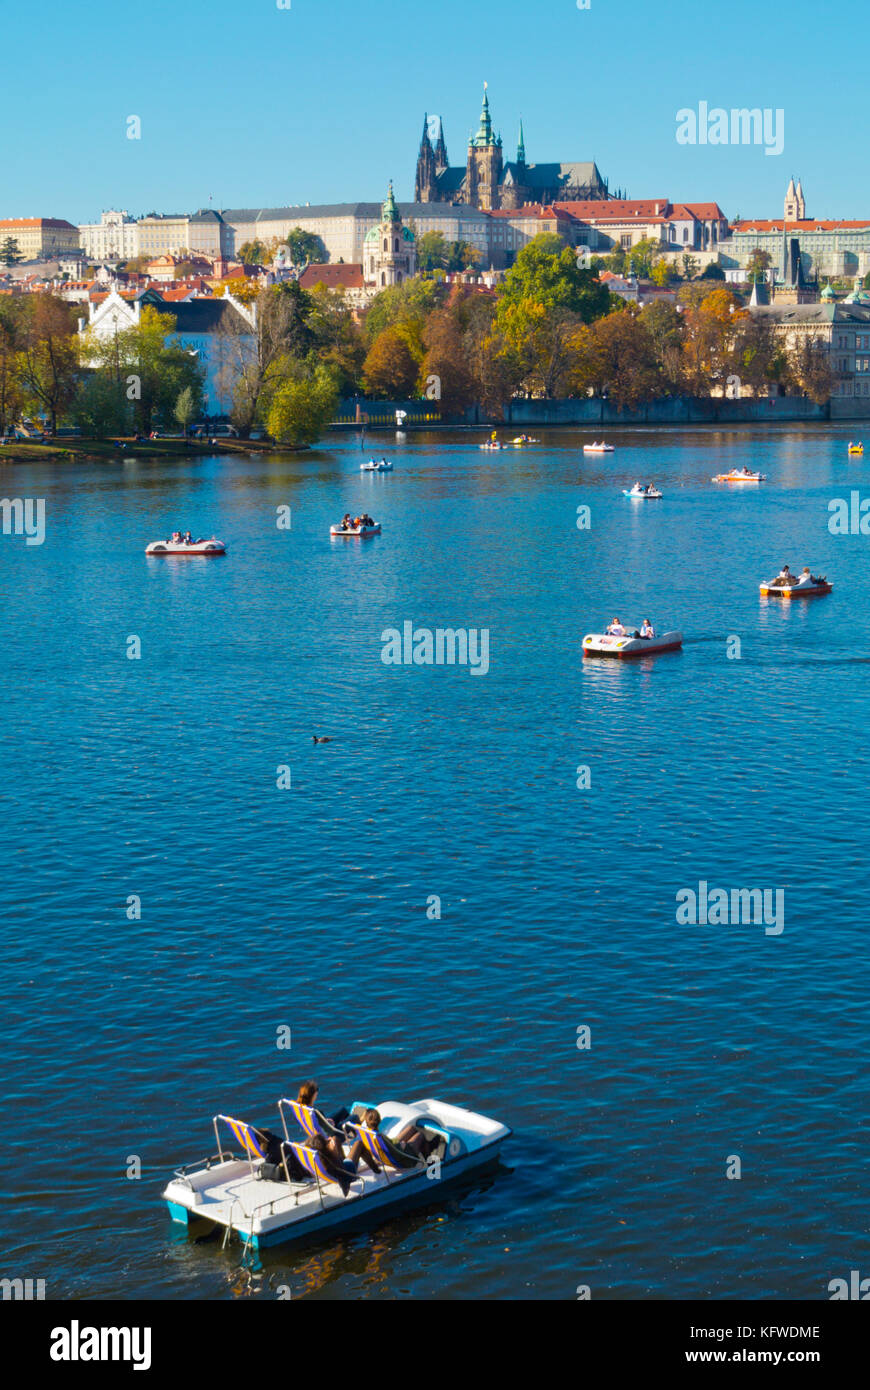 Pedalos and boats, Vltava River, in front of Mala Strana and Hrad the castle hill, Prague, Czech Republic Stock Photo